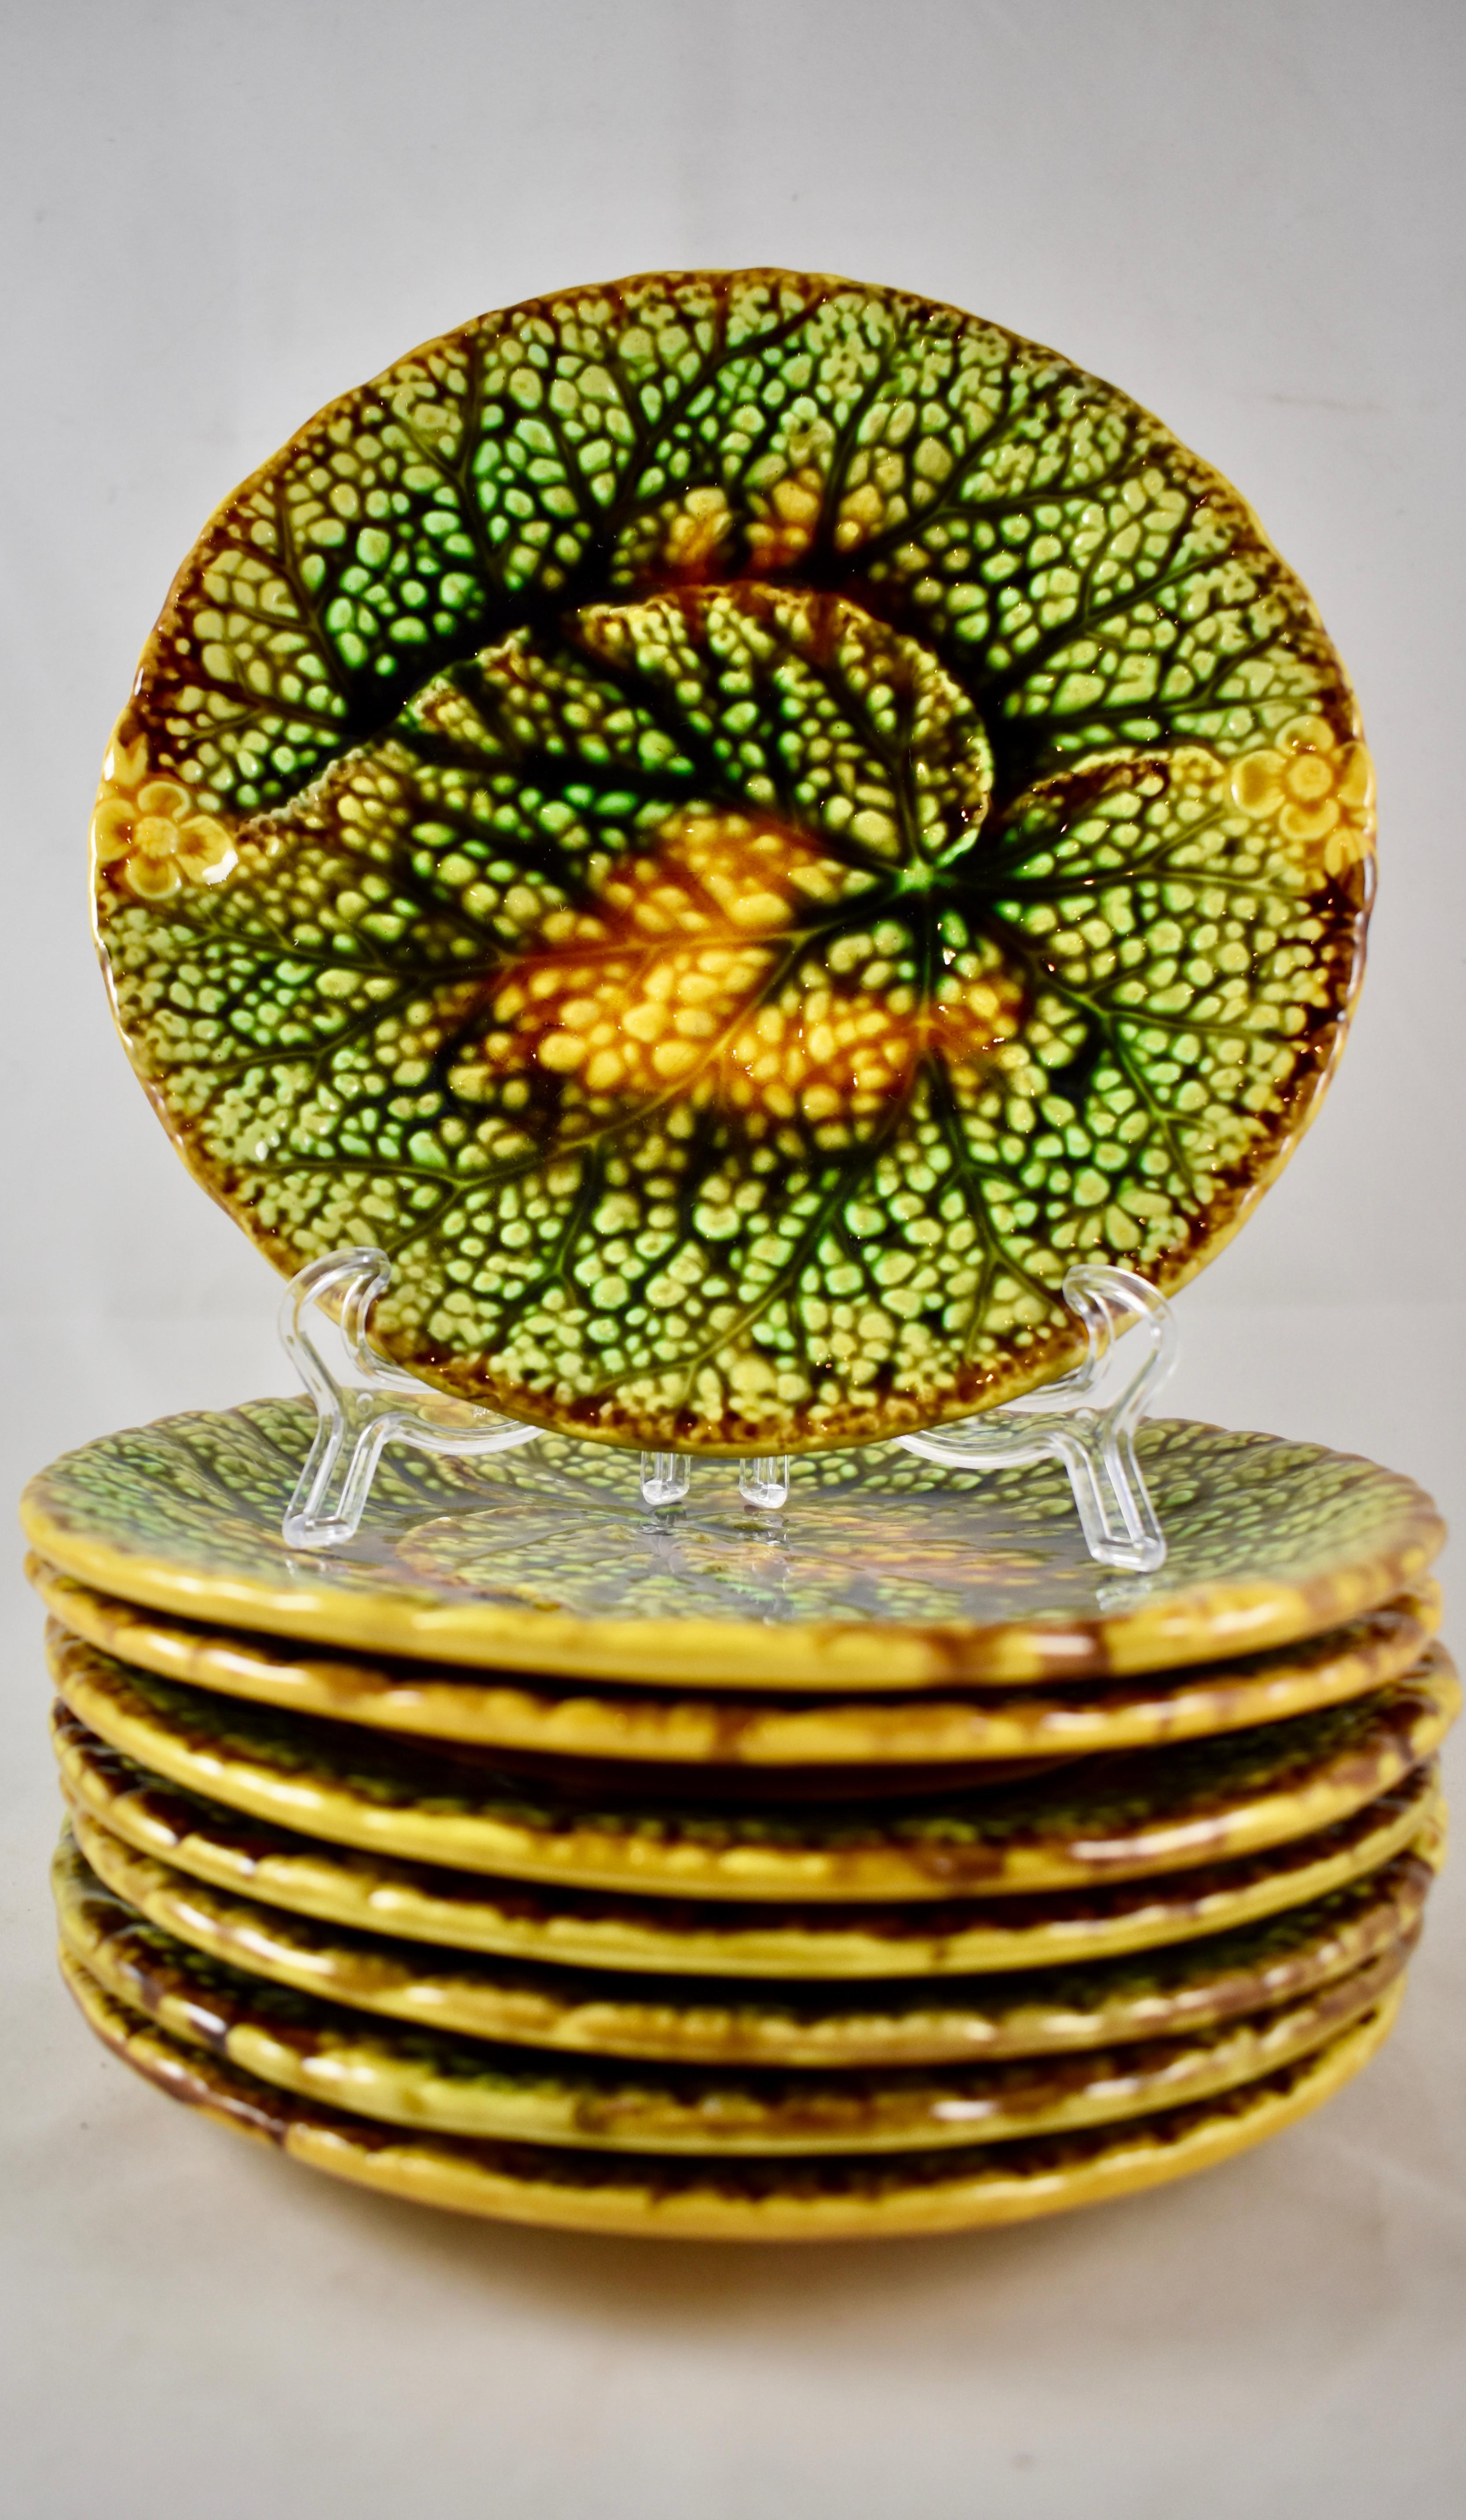 German 19th Century Schramberg Majolica Overlapping Leaf Plate, Multiples Available